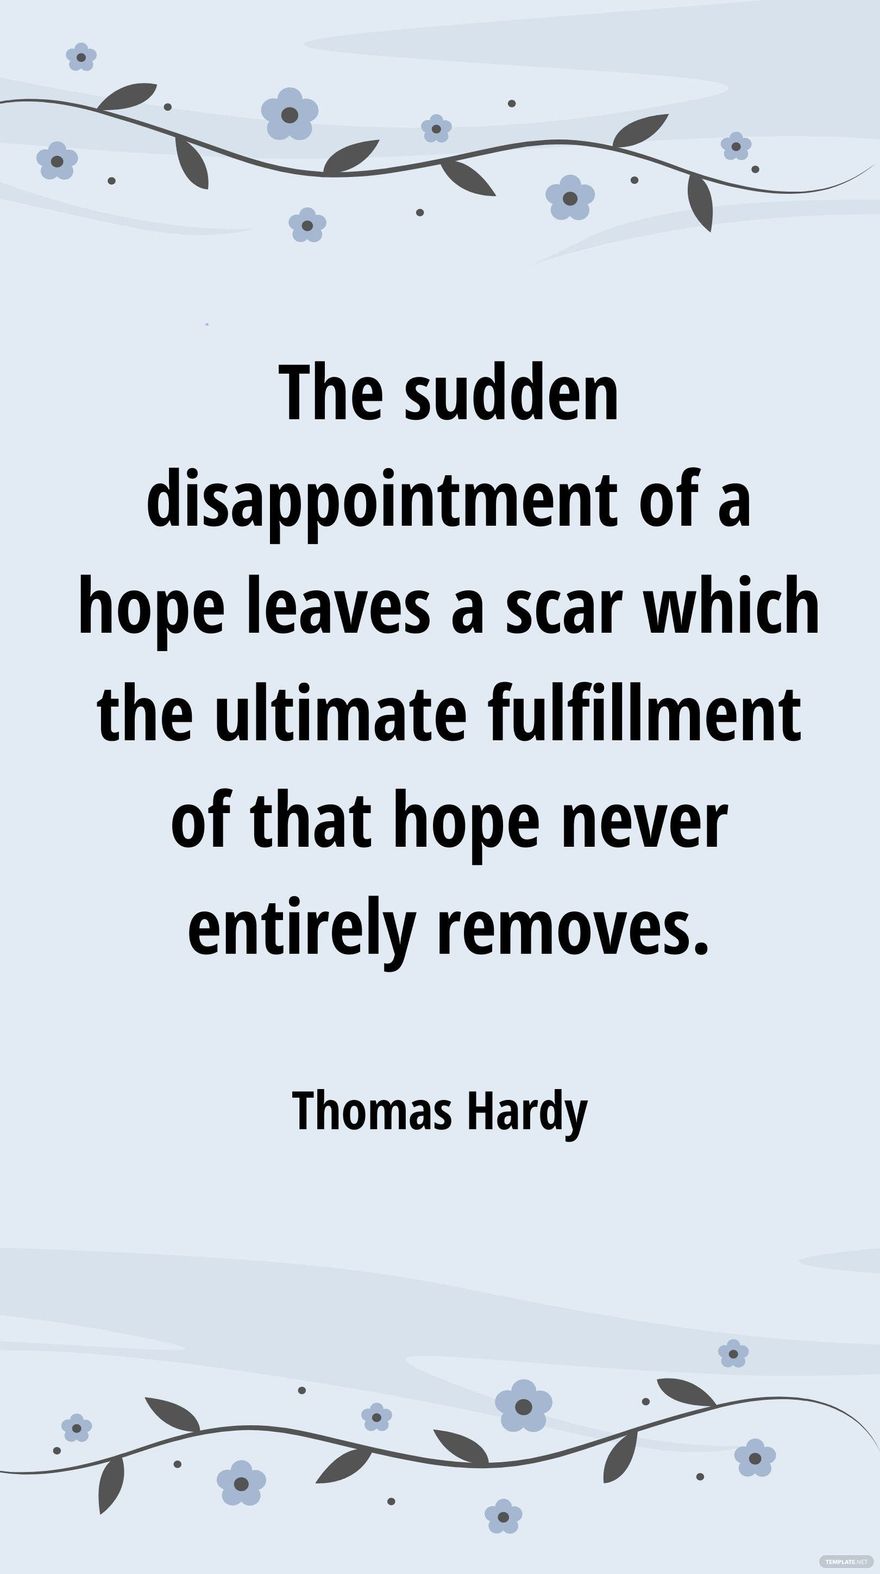 Free Thomas Hardy - The sudden disappointment of a hope leaves a scar which the ultimate fulfillment of that hope never entirely removes. in JPG